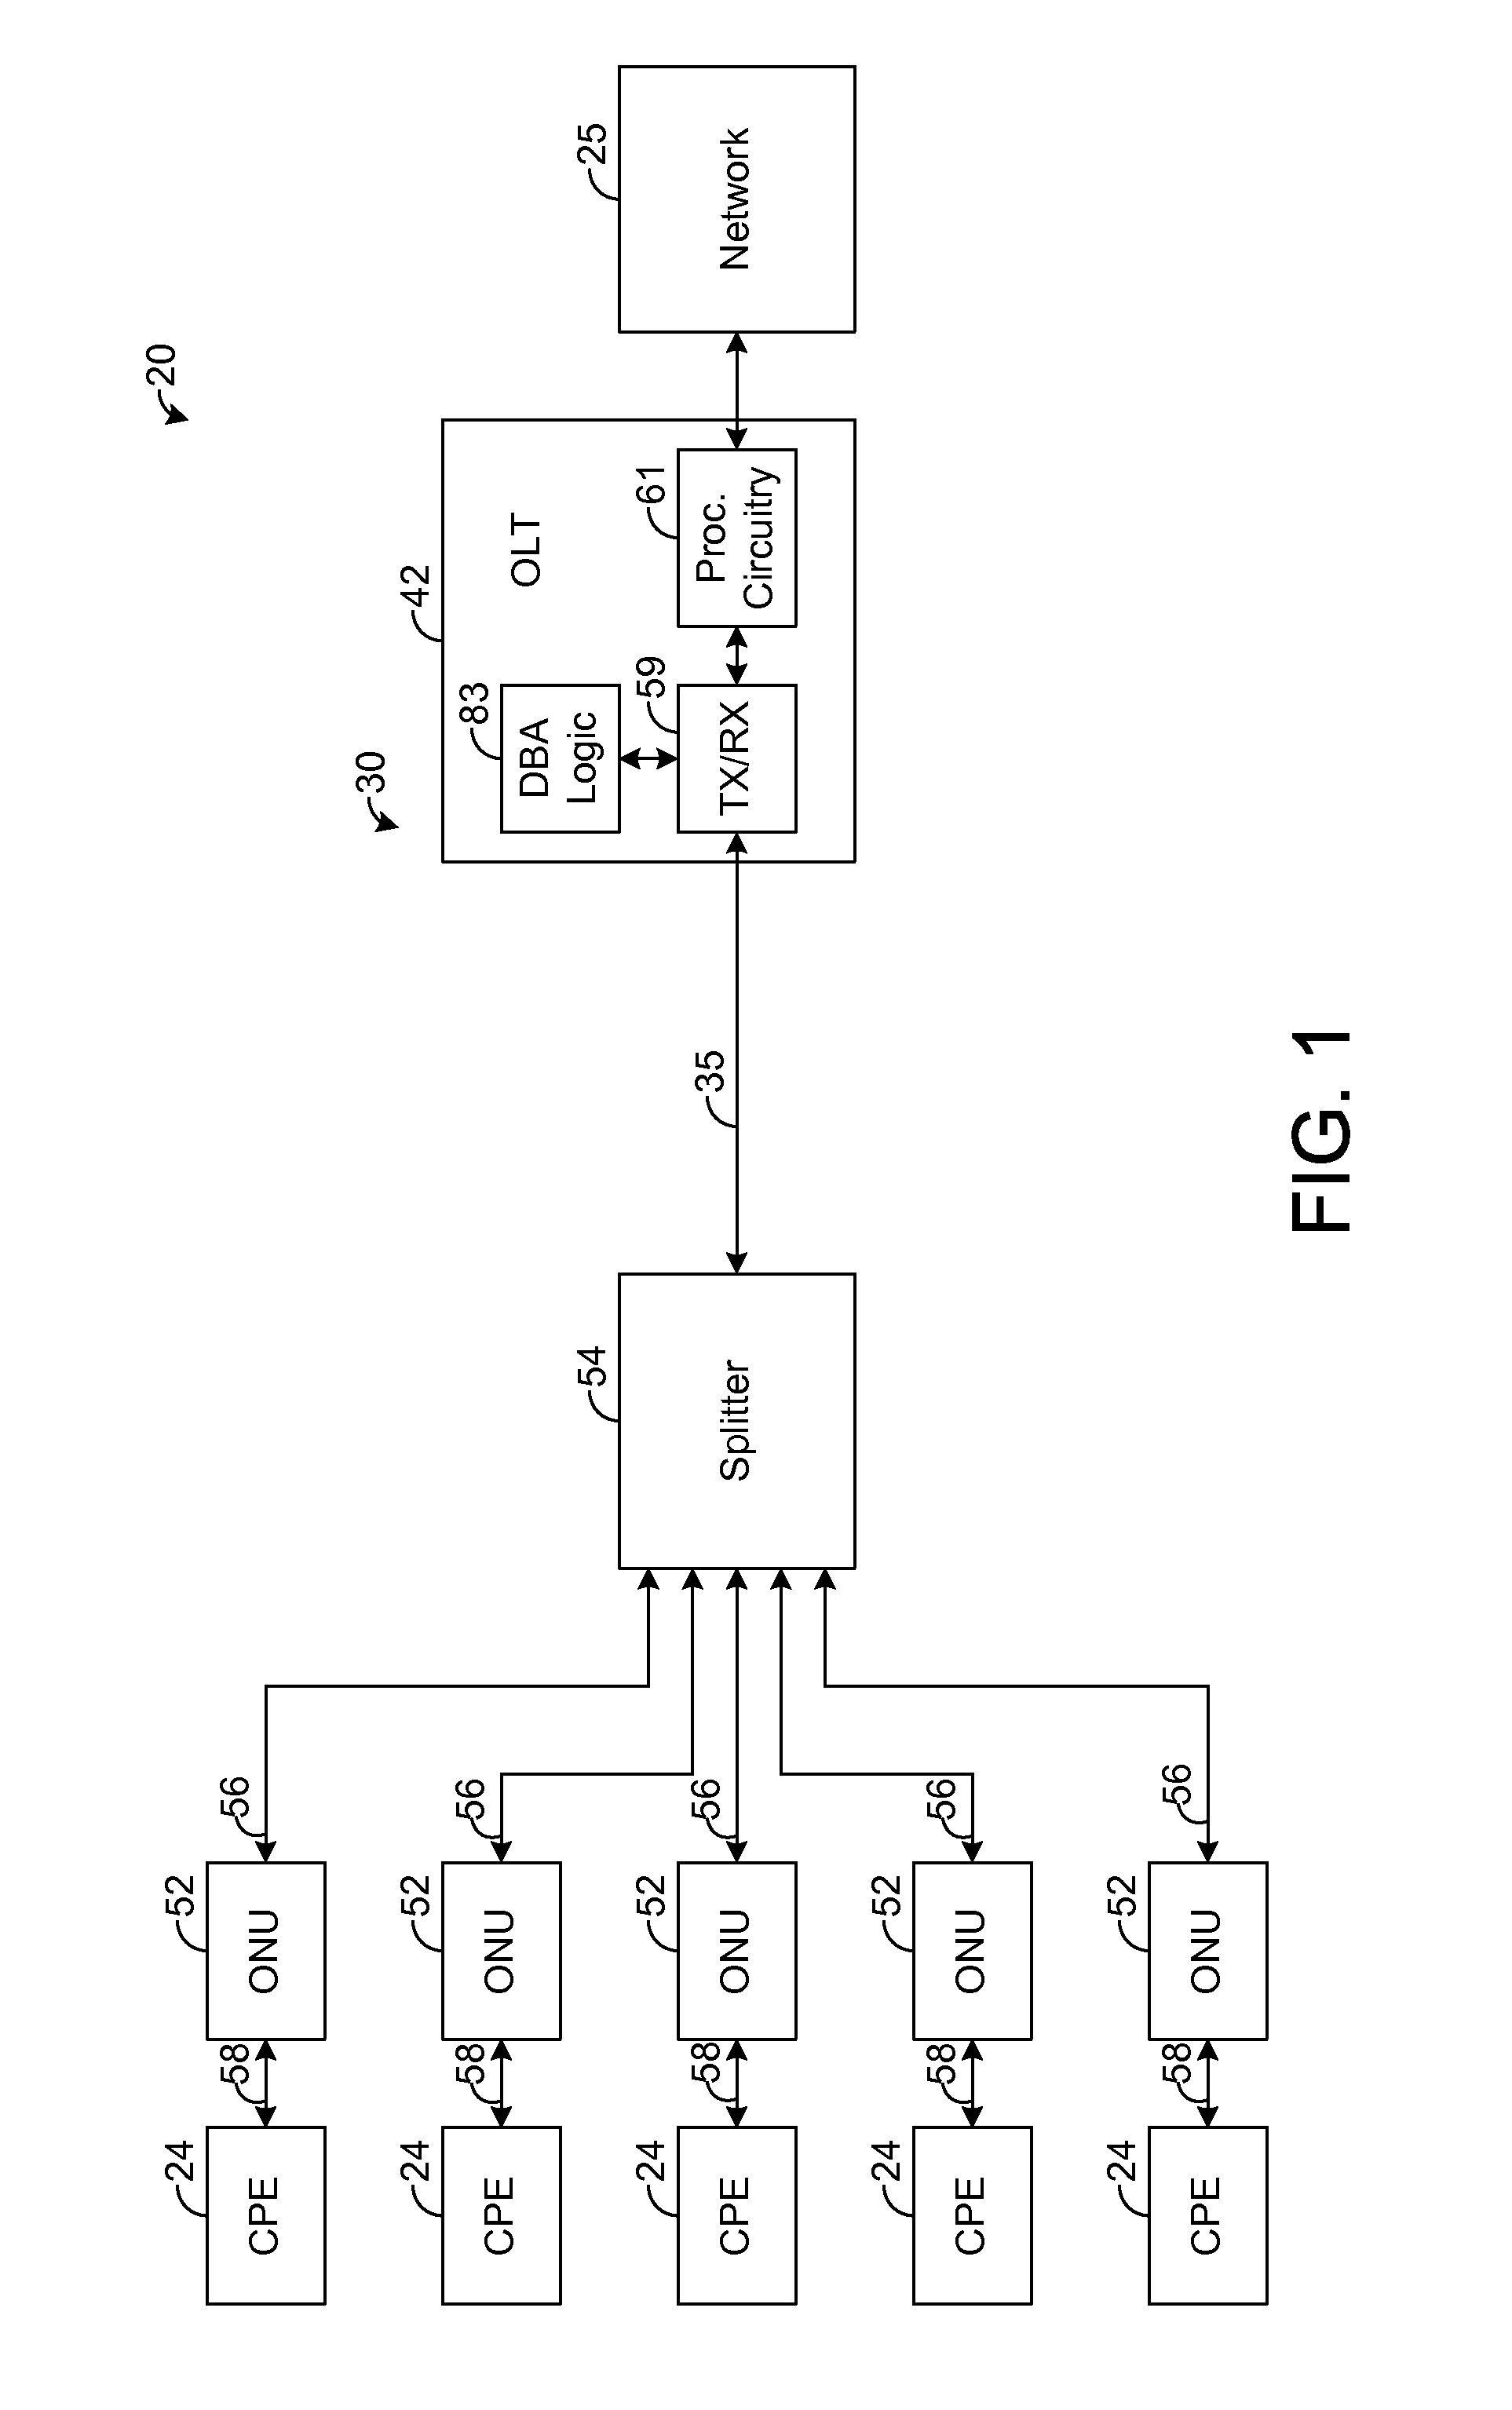 Systems and methods for scheduling business and residential services in optical networks